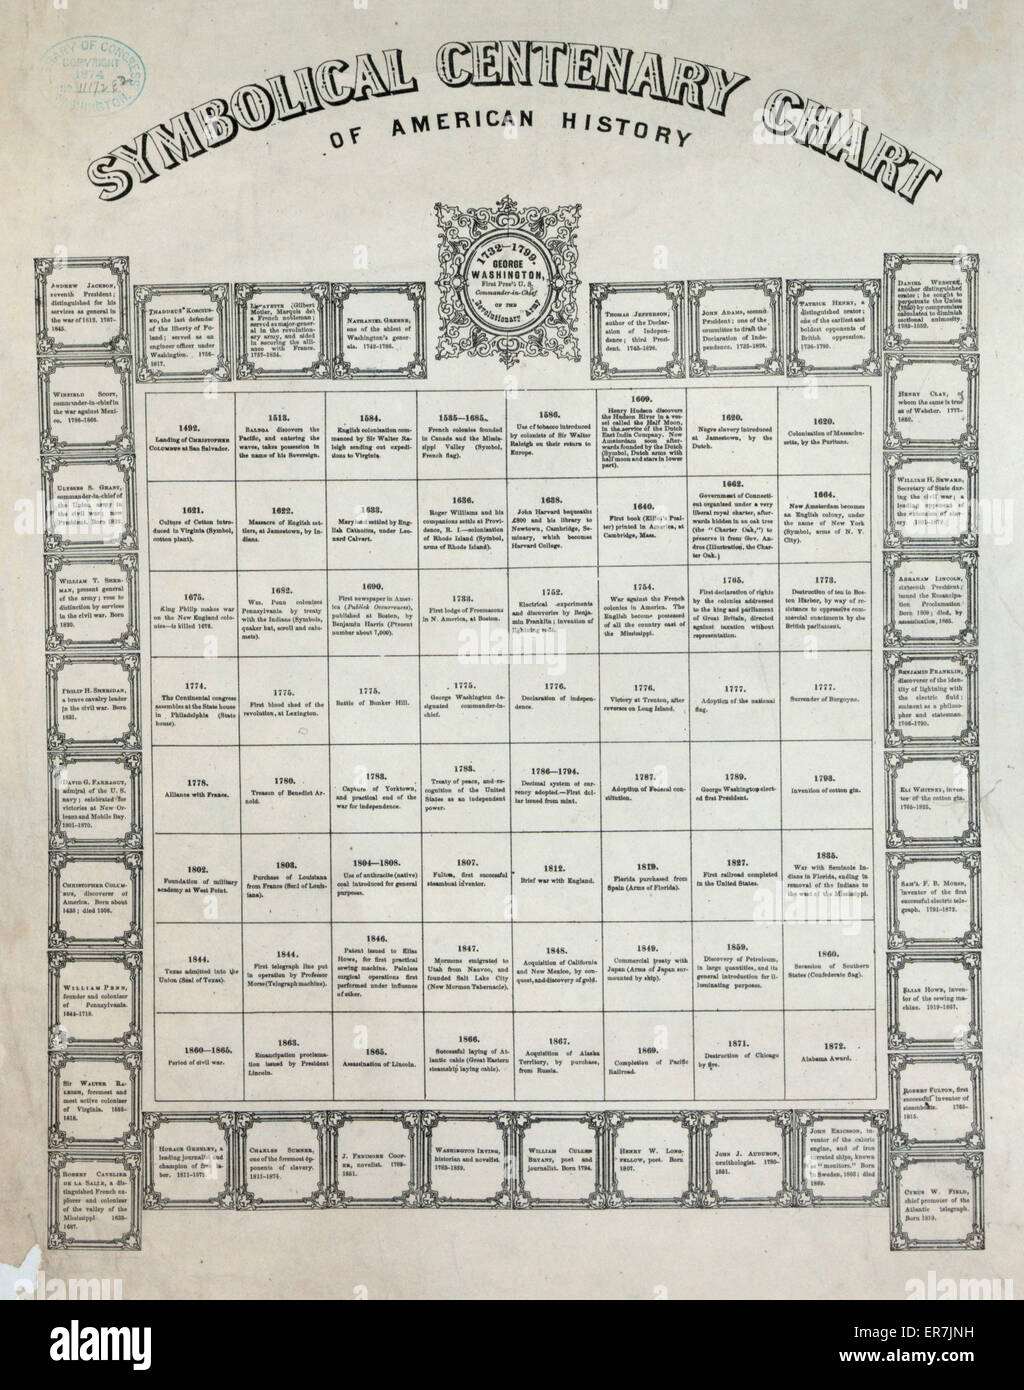 Symbolical centenary chart of American history 1876. Date c1874. Stock Photo